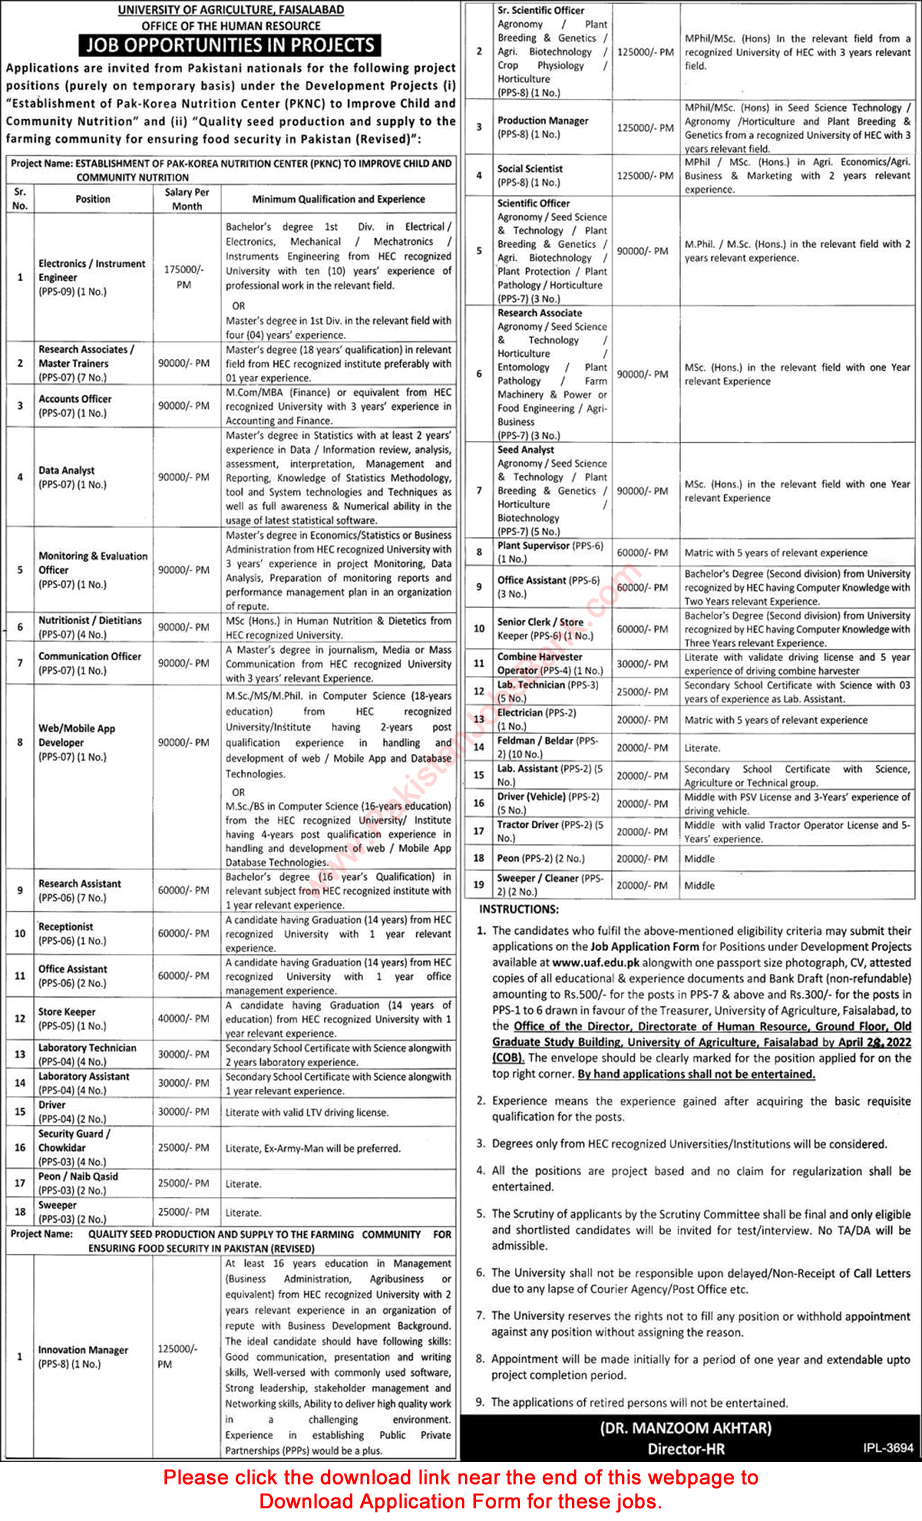 University of Agriculture Faisalabad Jobs April 2022 UAF Application Form Scientific Officers & Others Latest